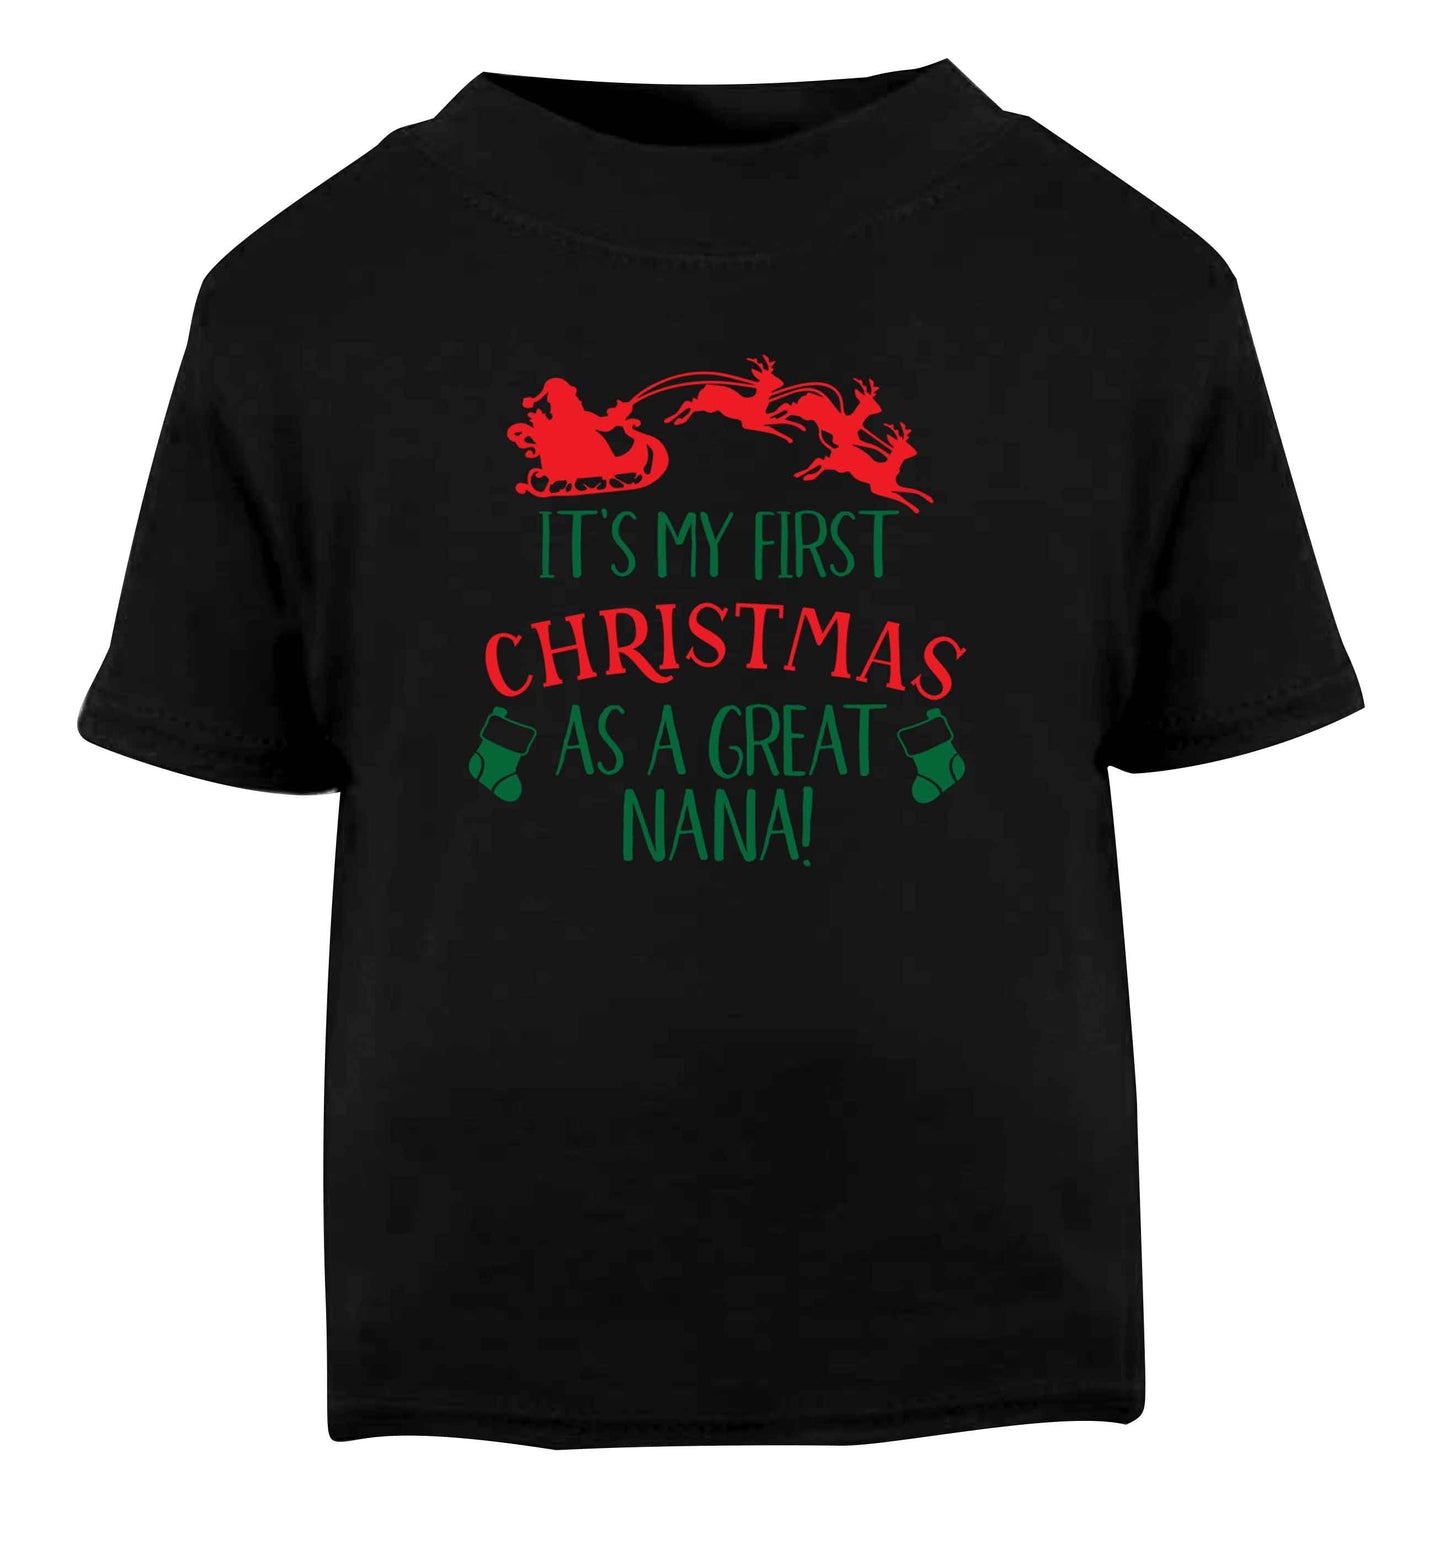 It's my first Christmas as a great nana! Black Baby Toddler Tshirt 2 years